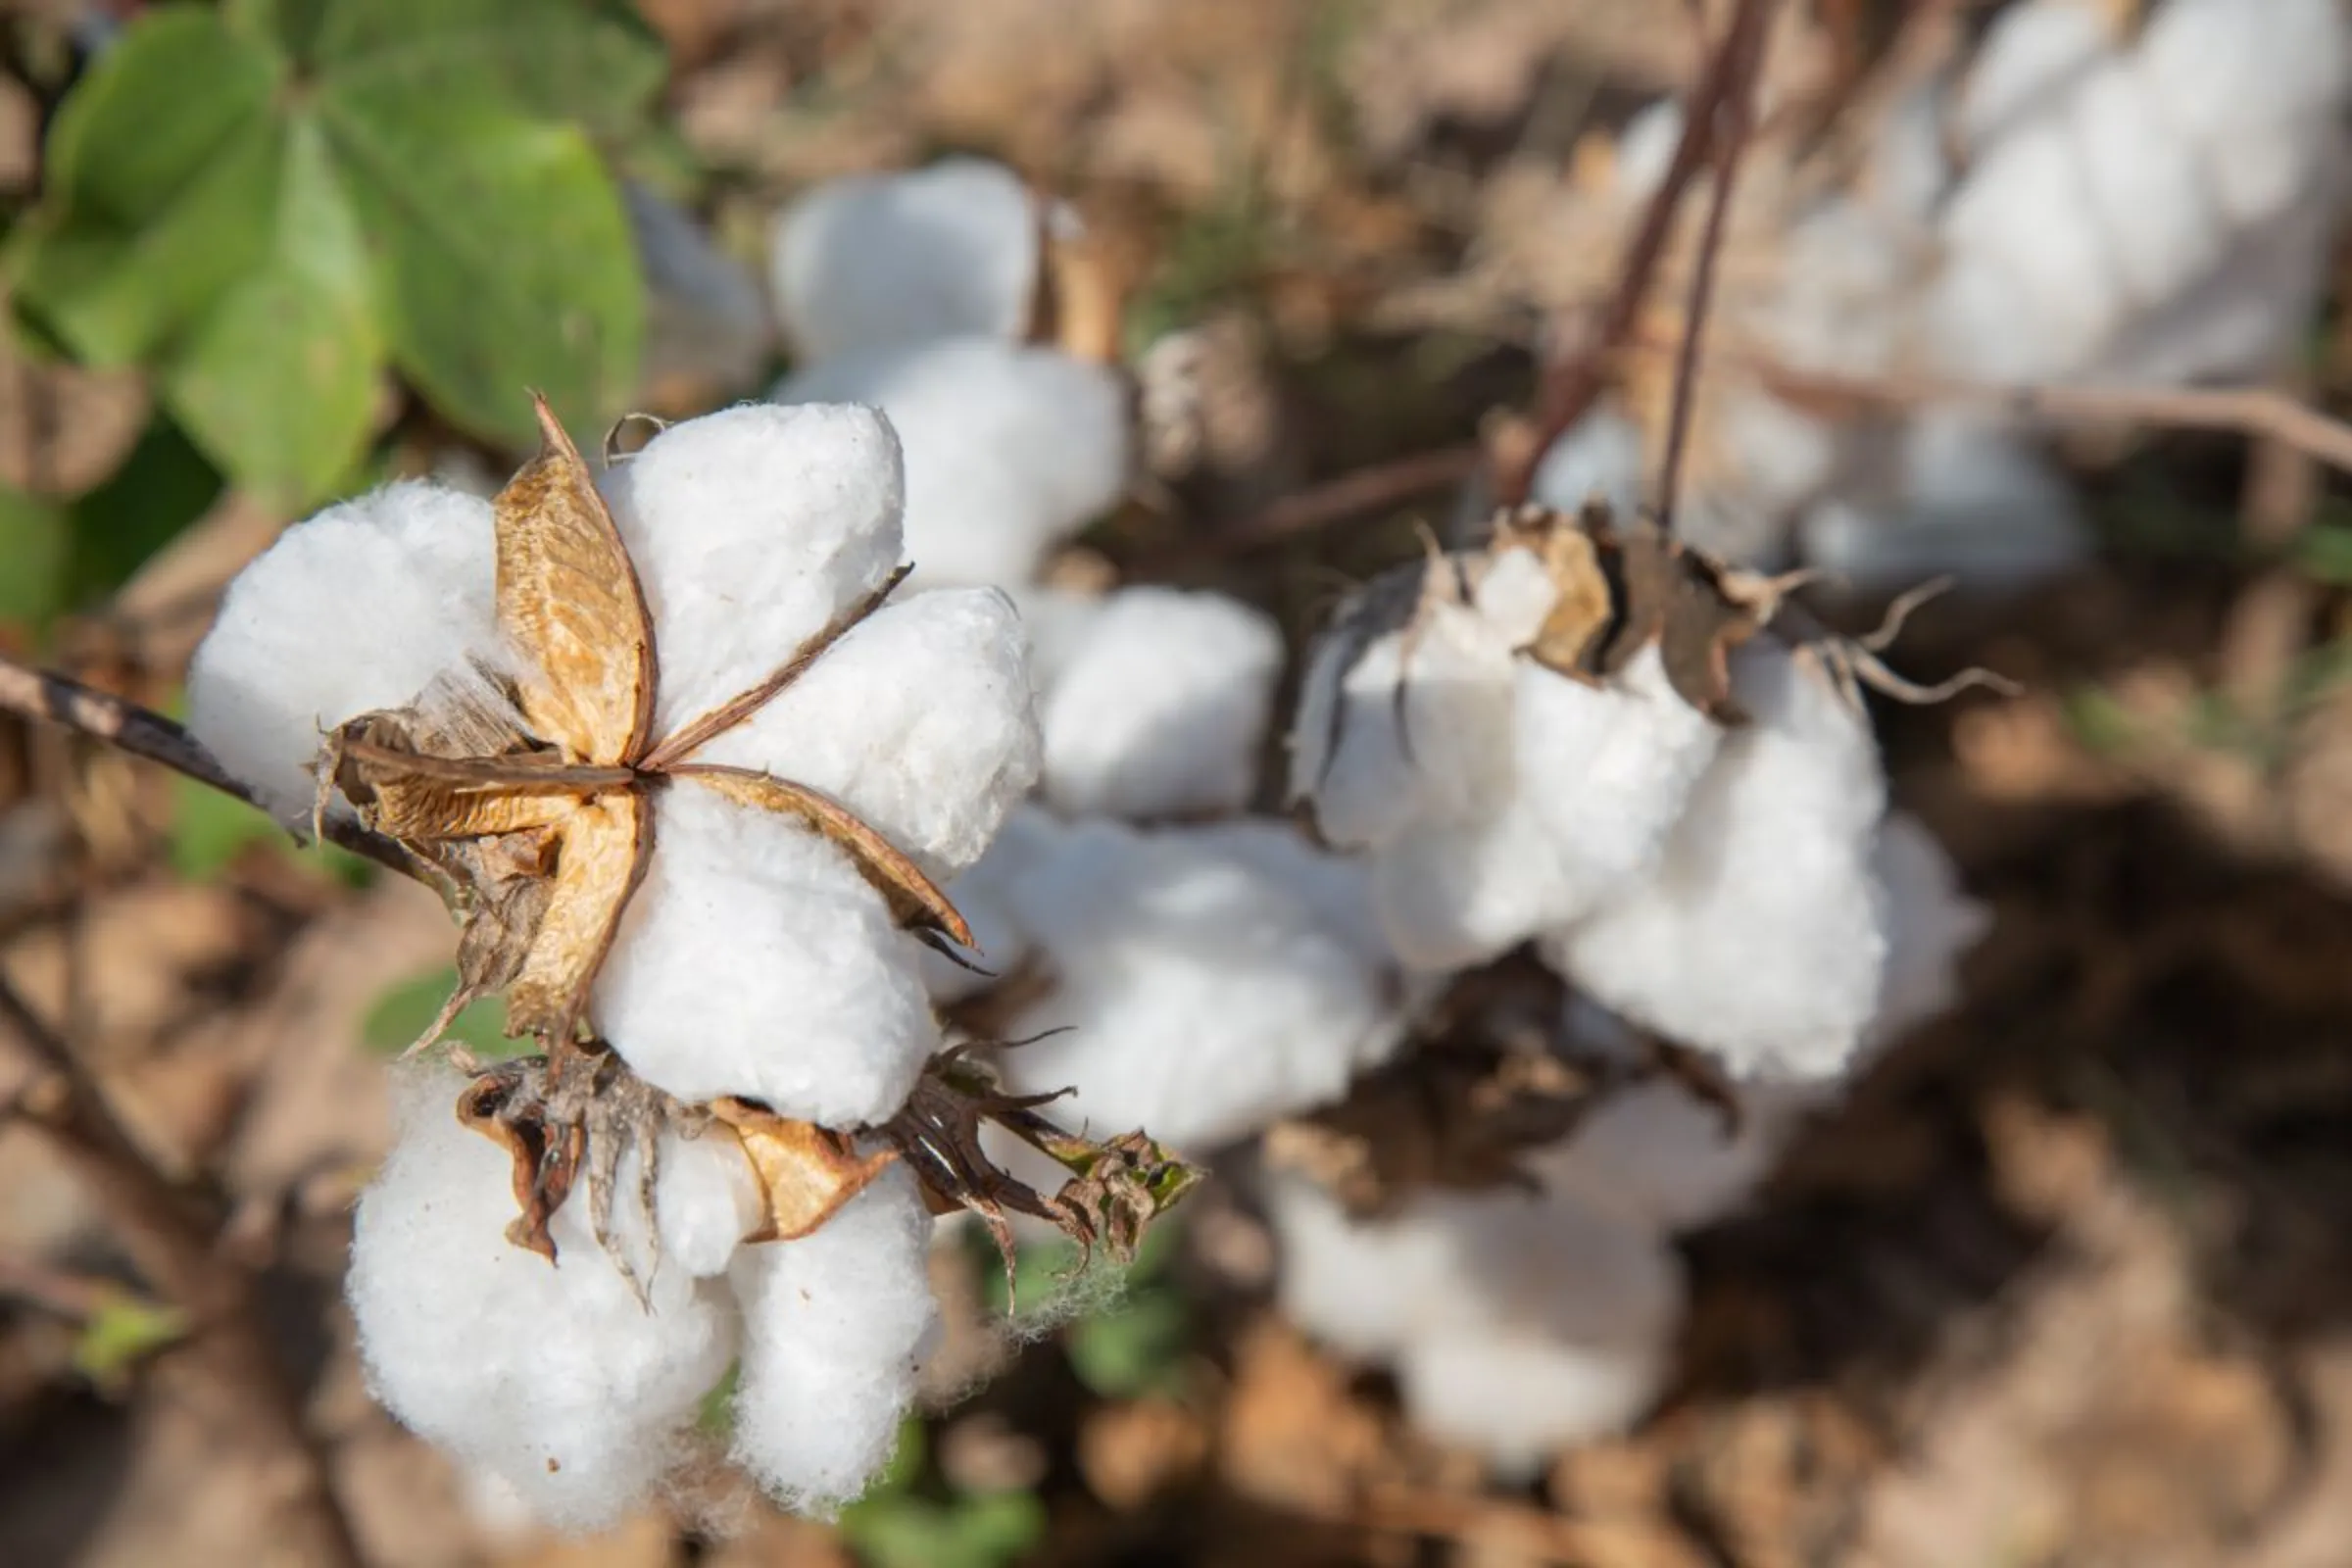 A cotton plant at a farm, where production is linked to environmental destruction and threatened water supplies, in Brazil. June, 2023. Thomas Bauer/Earthsight/Handout via Thomson Reuters Foundation